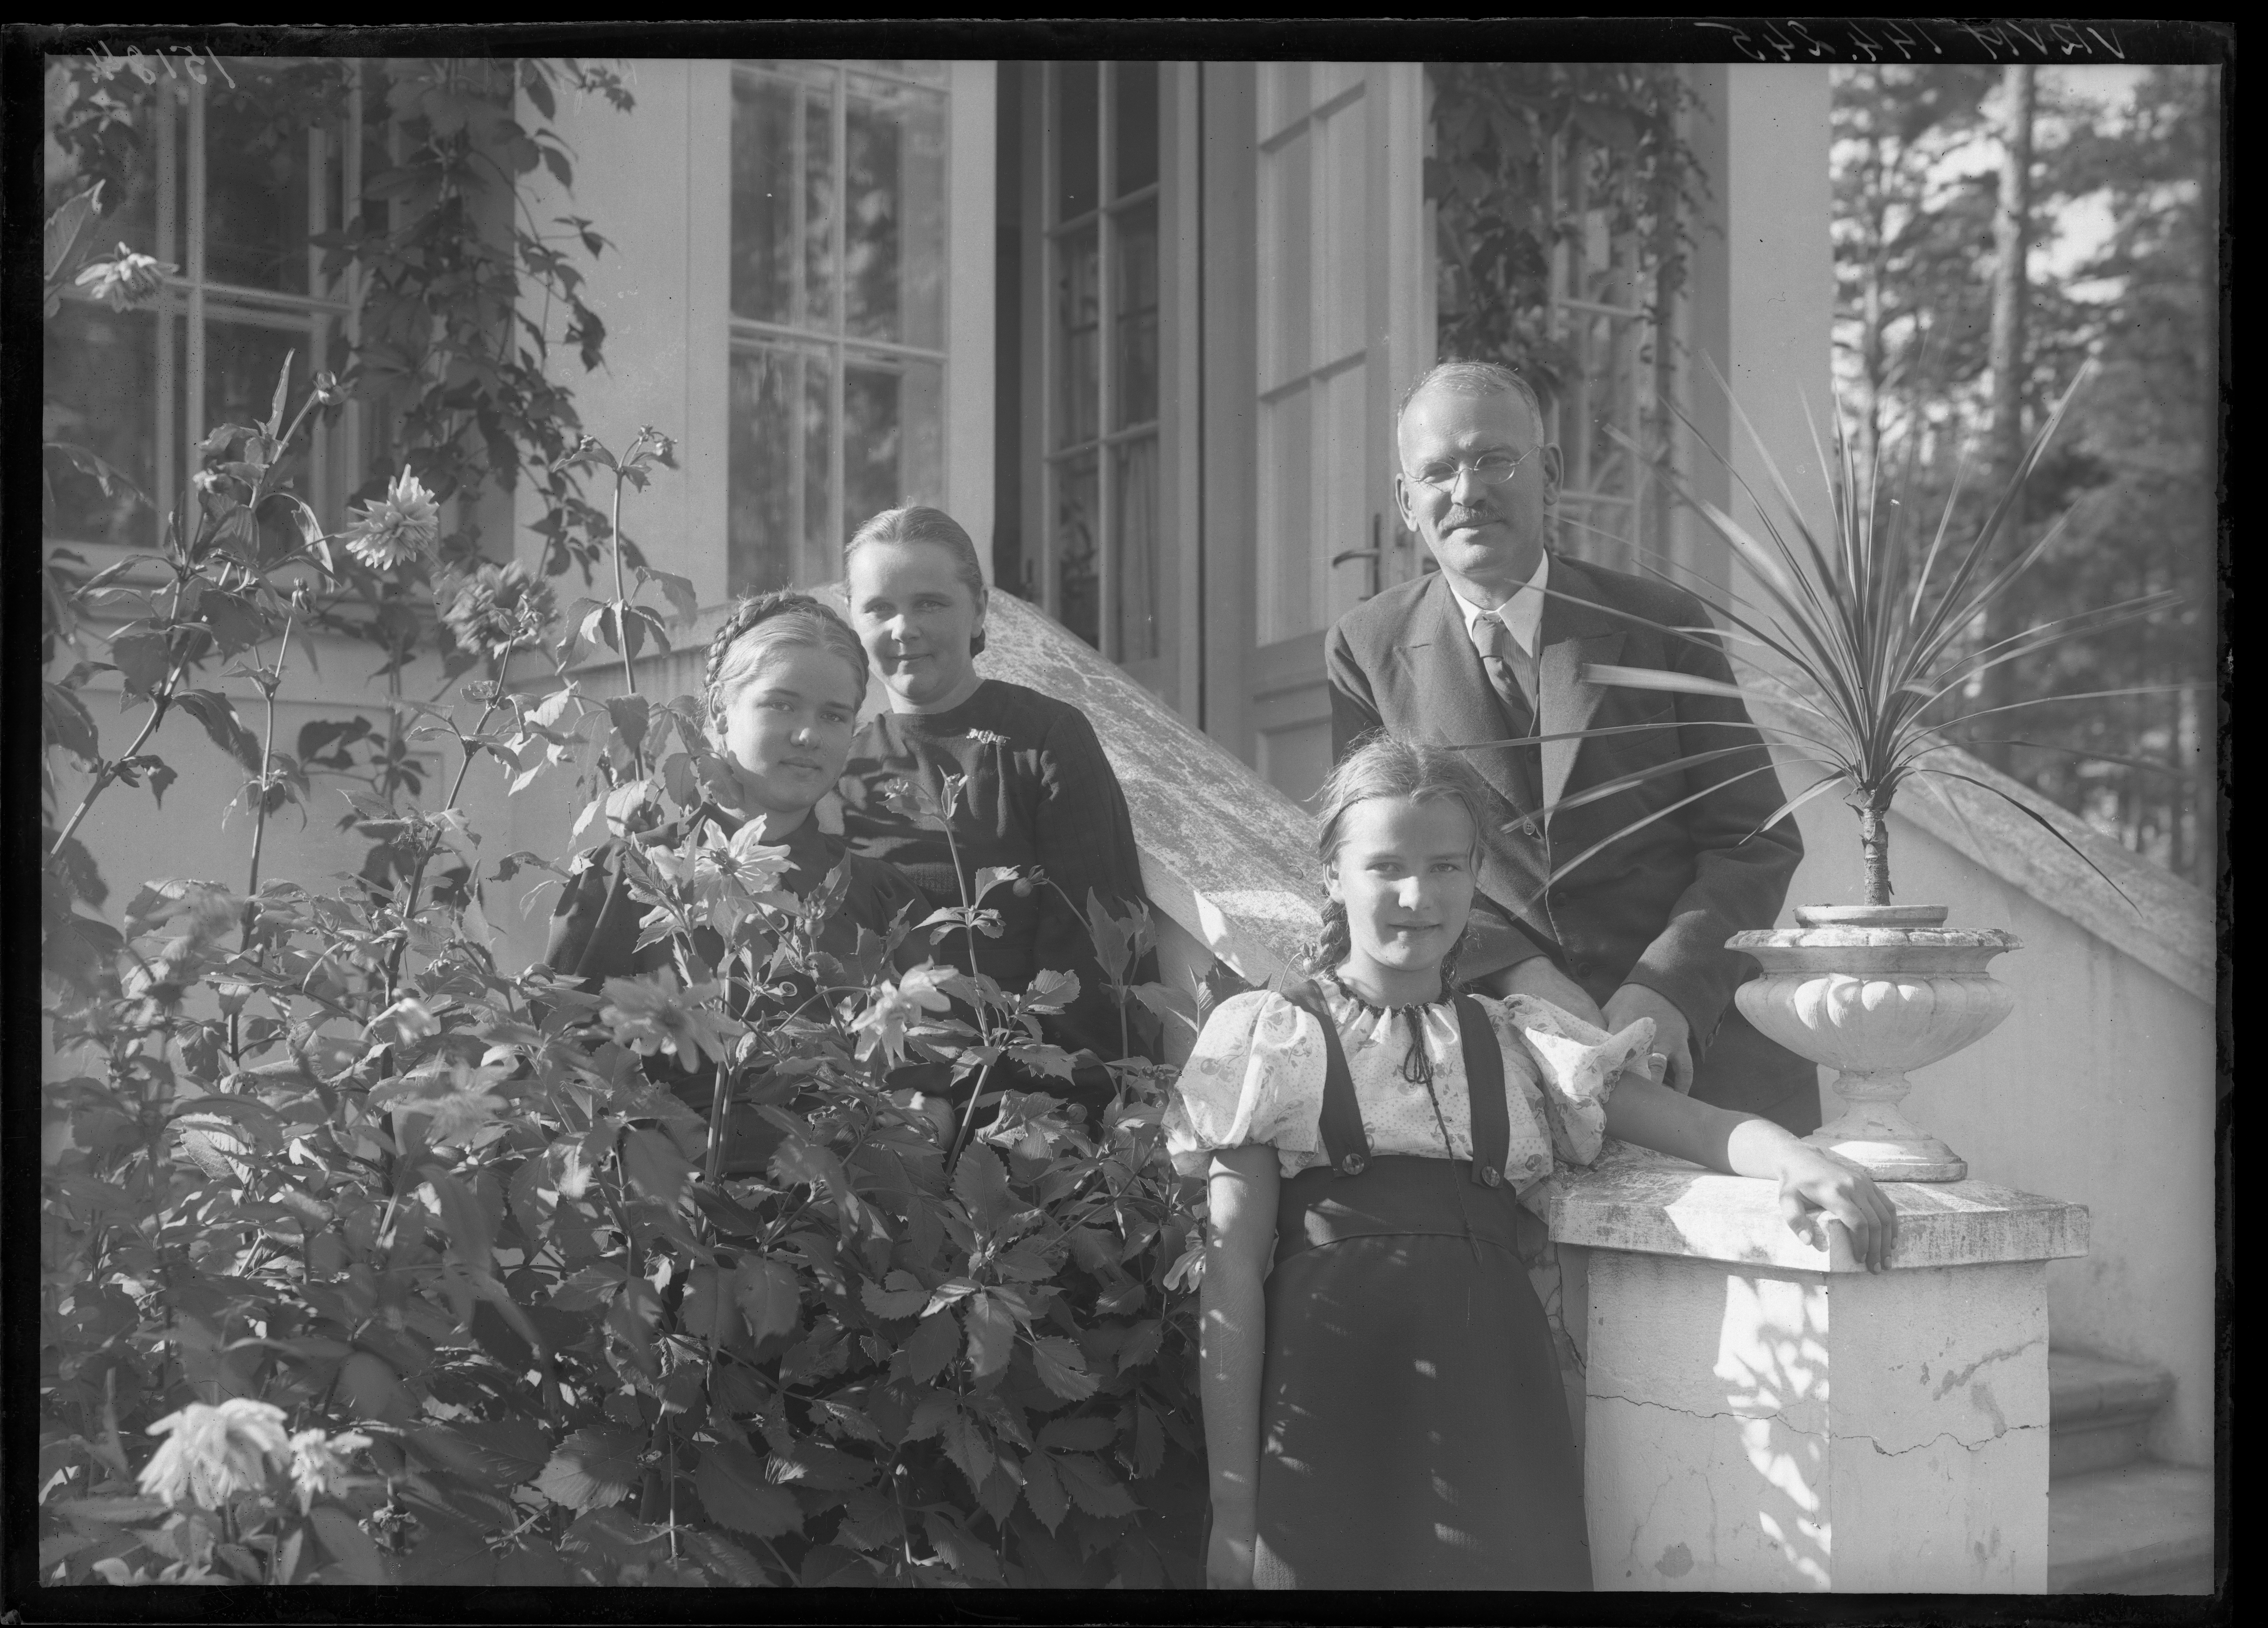 Portrait of philisopher, professor of Latvian University Pauls Dāle (1889-1968) with his family in front of their house in Mežaparks, Riga, taken by Krišs Rake in 1936. P. Dāle was a disciple of E. Husserl, the most prominent philosopher in the interwar Latvia, founder of the Institute of Psychology of the Latvian University in 1938. Due to his philosophic and religious thoughts P. Dāle was fired from the Latvian State University in 1948 and deprived from possibility to do academic research. Although 5 years later he was allowed to work at the Institute of Language and Literature of the Latvian SSR Academy of Sciences and later also earned living by translations from Russian. The last years of his life were spent in poverty and isolation. VRVM 144.245